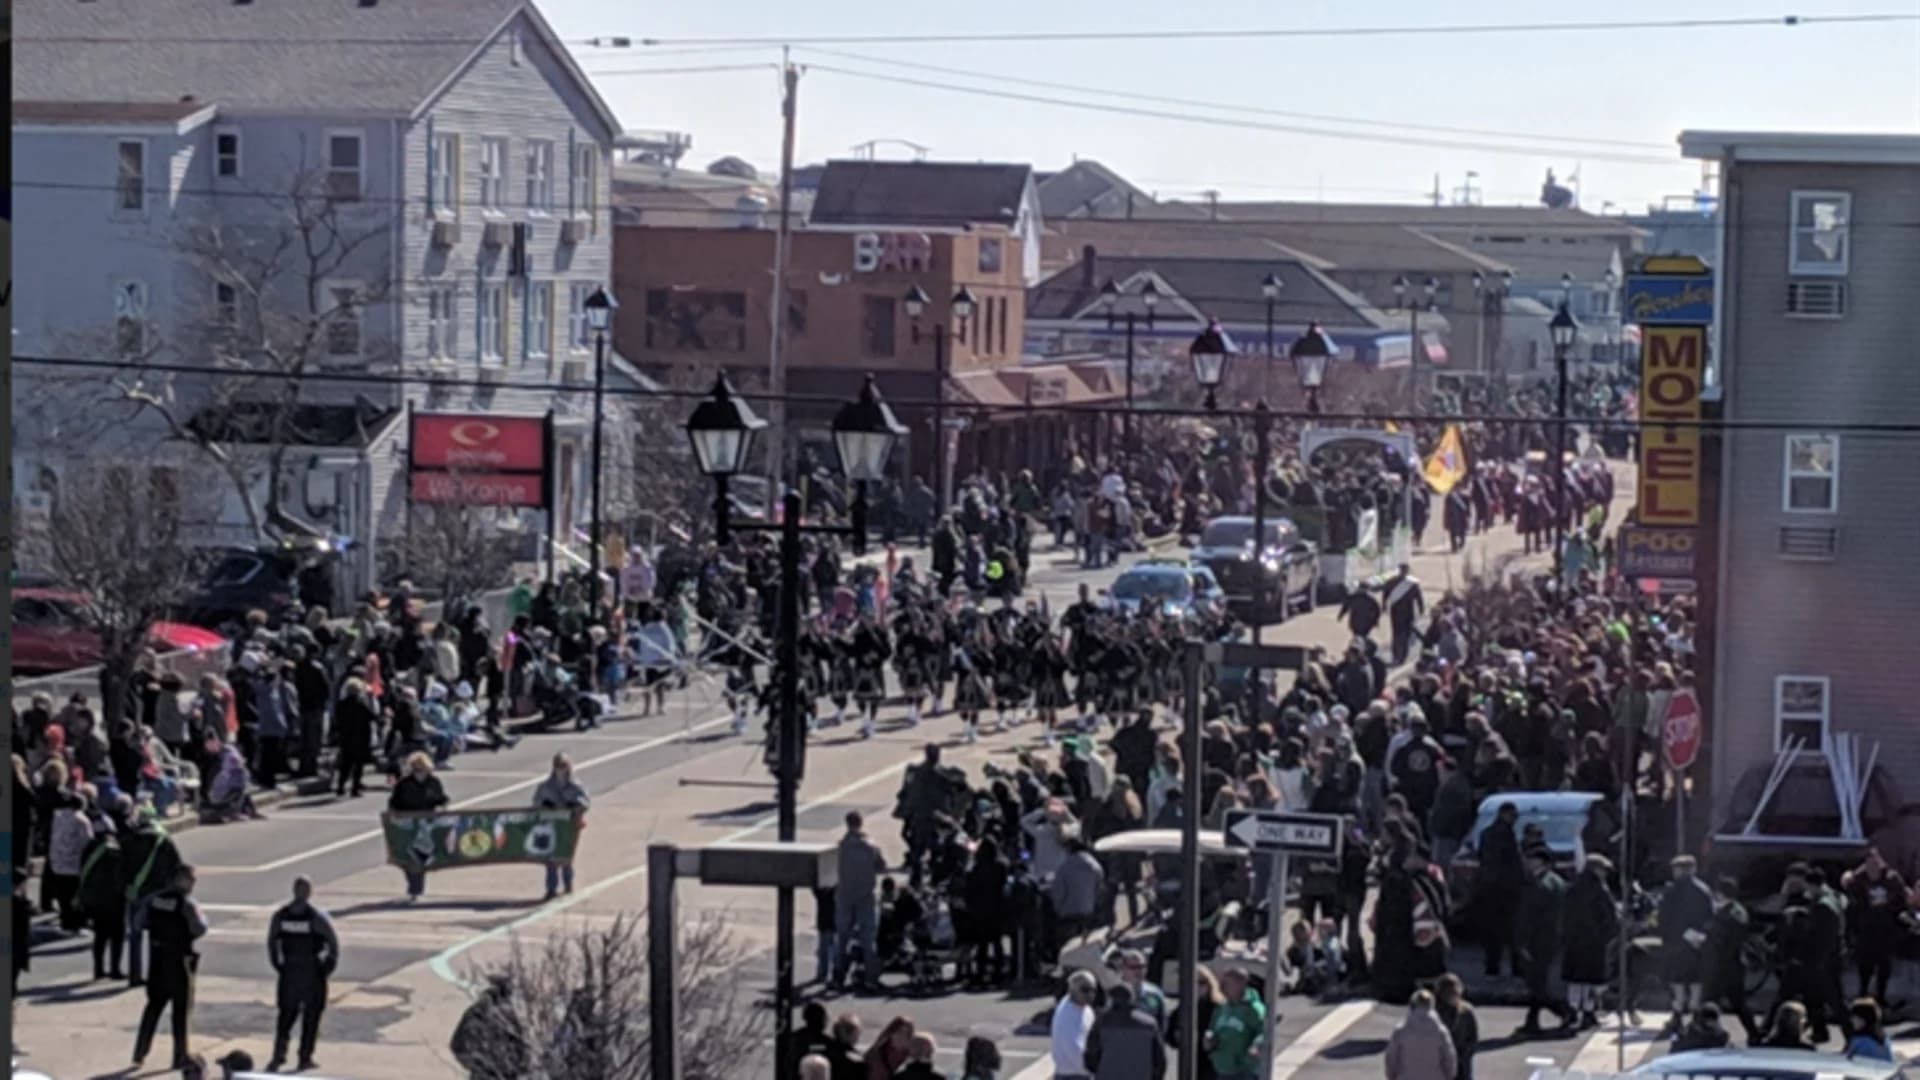 Submit Your 2020 New Jersey St. Patrick's Day Photos